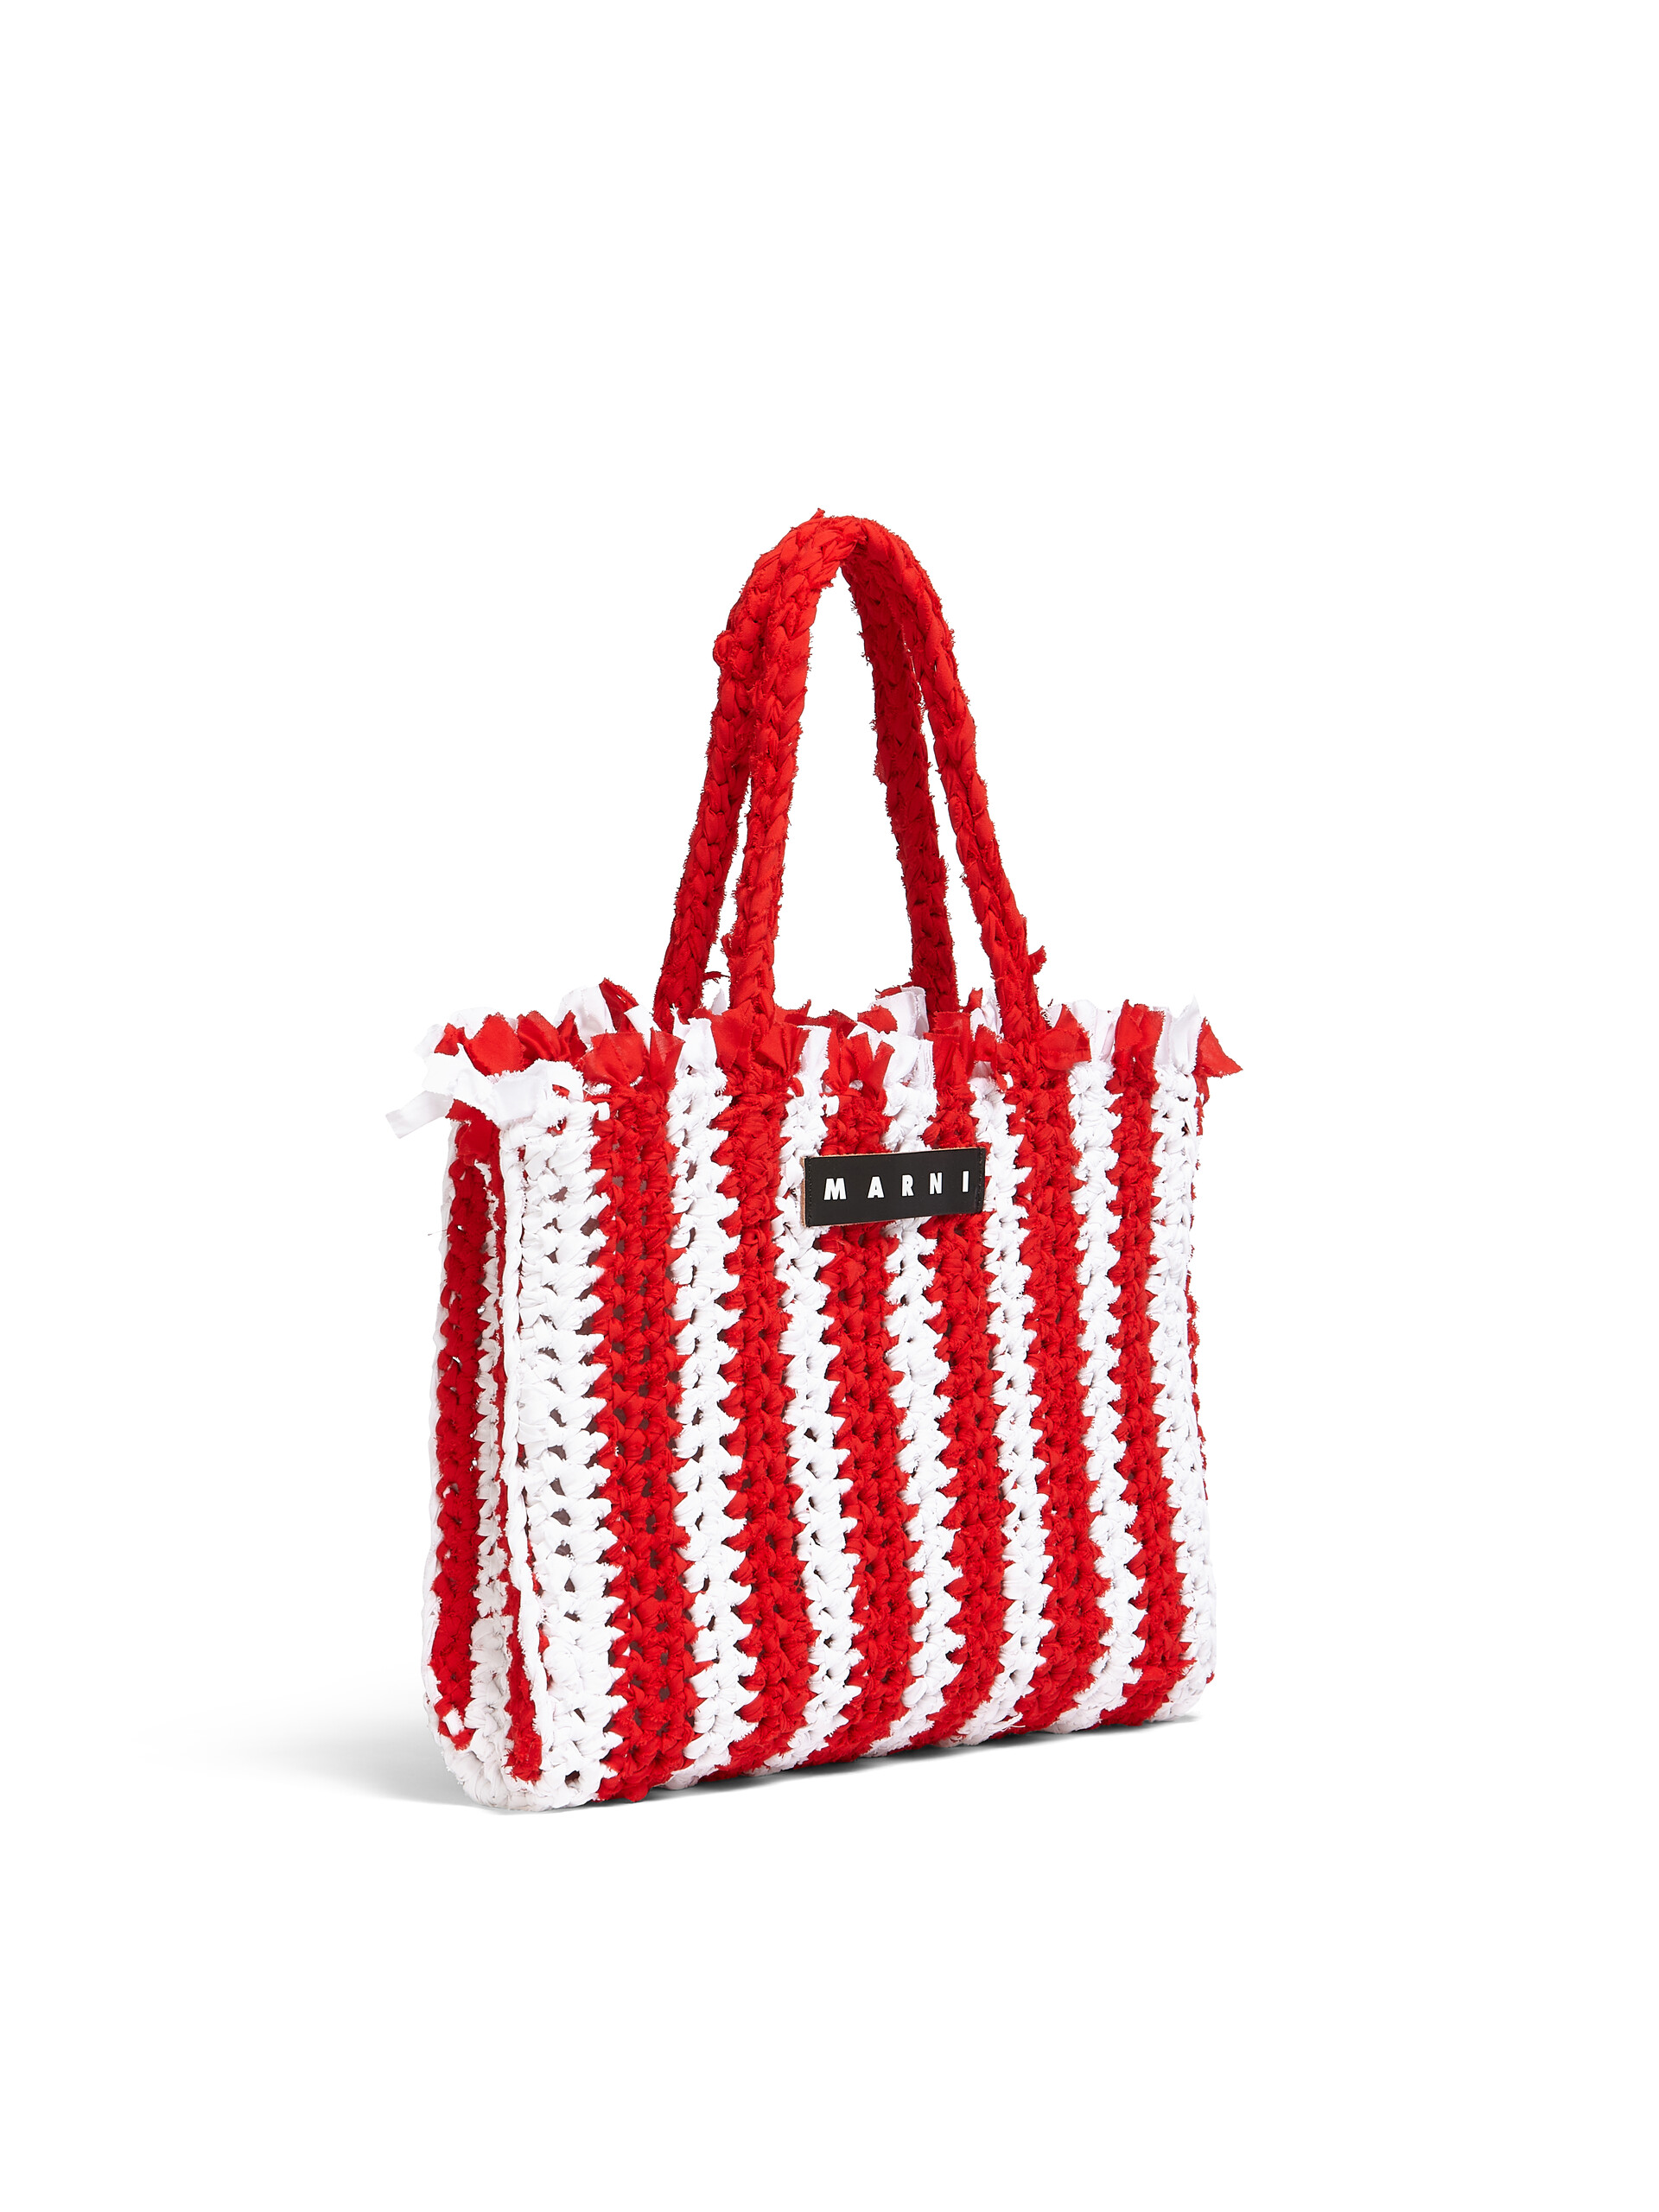 MARNI MARKET bag in white and red cotton - Bags - Image 2